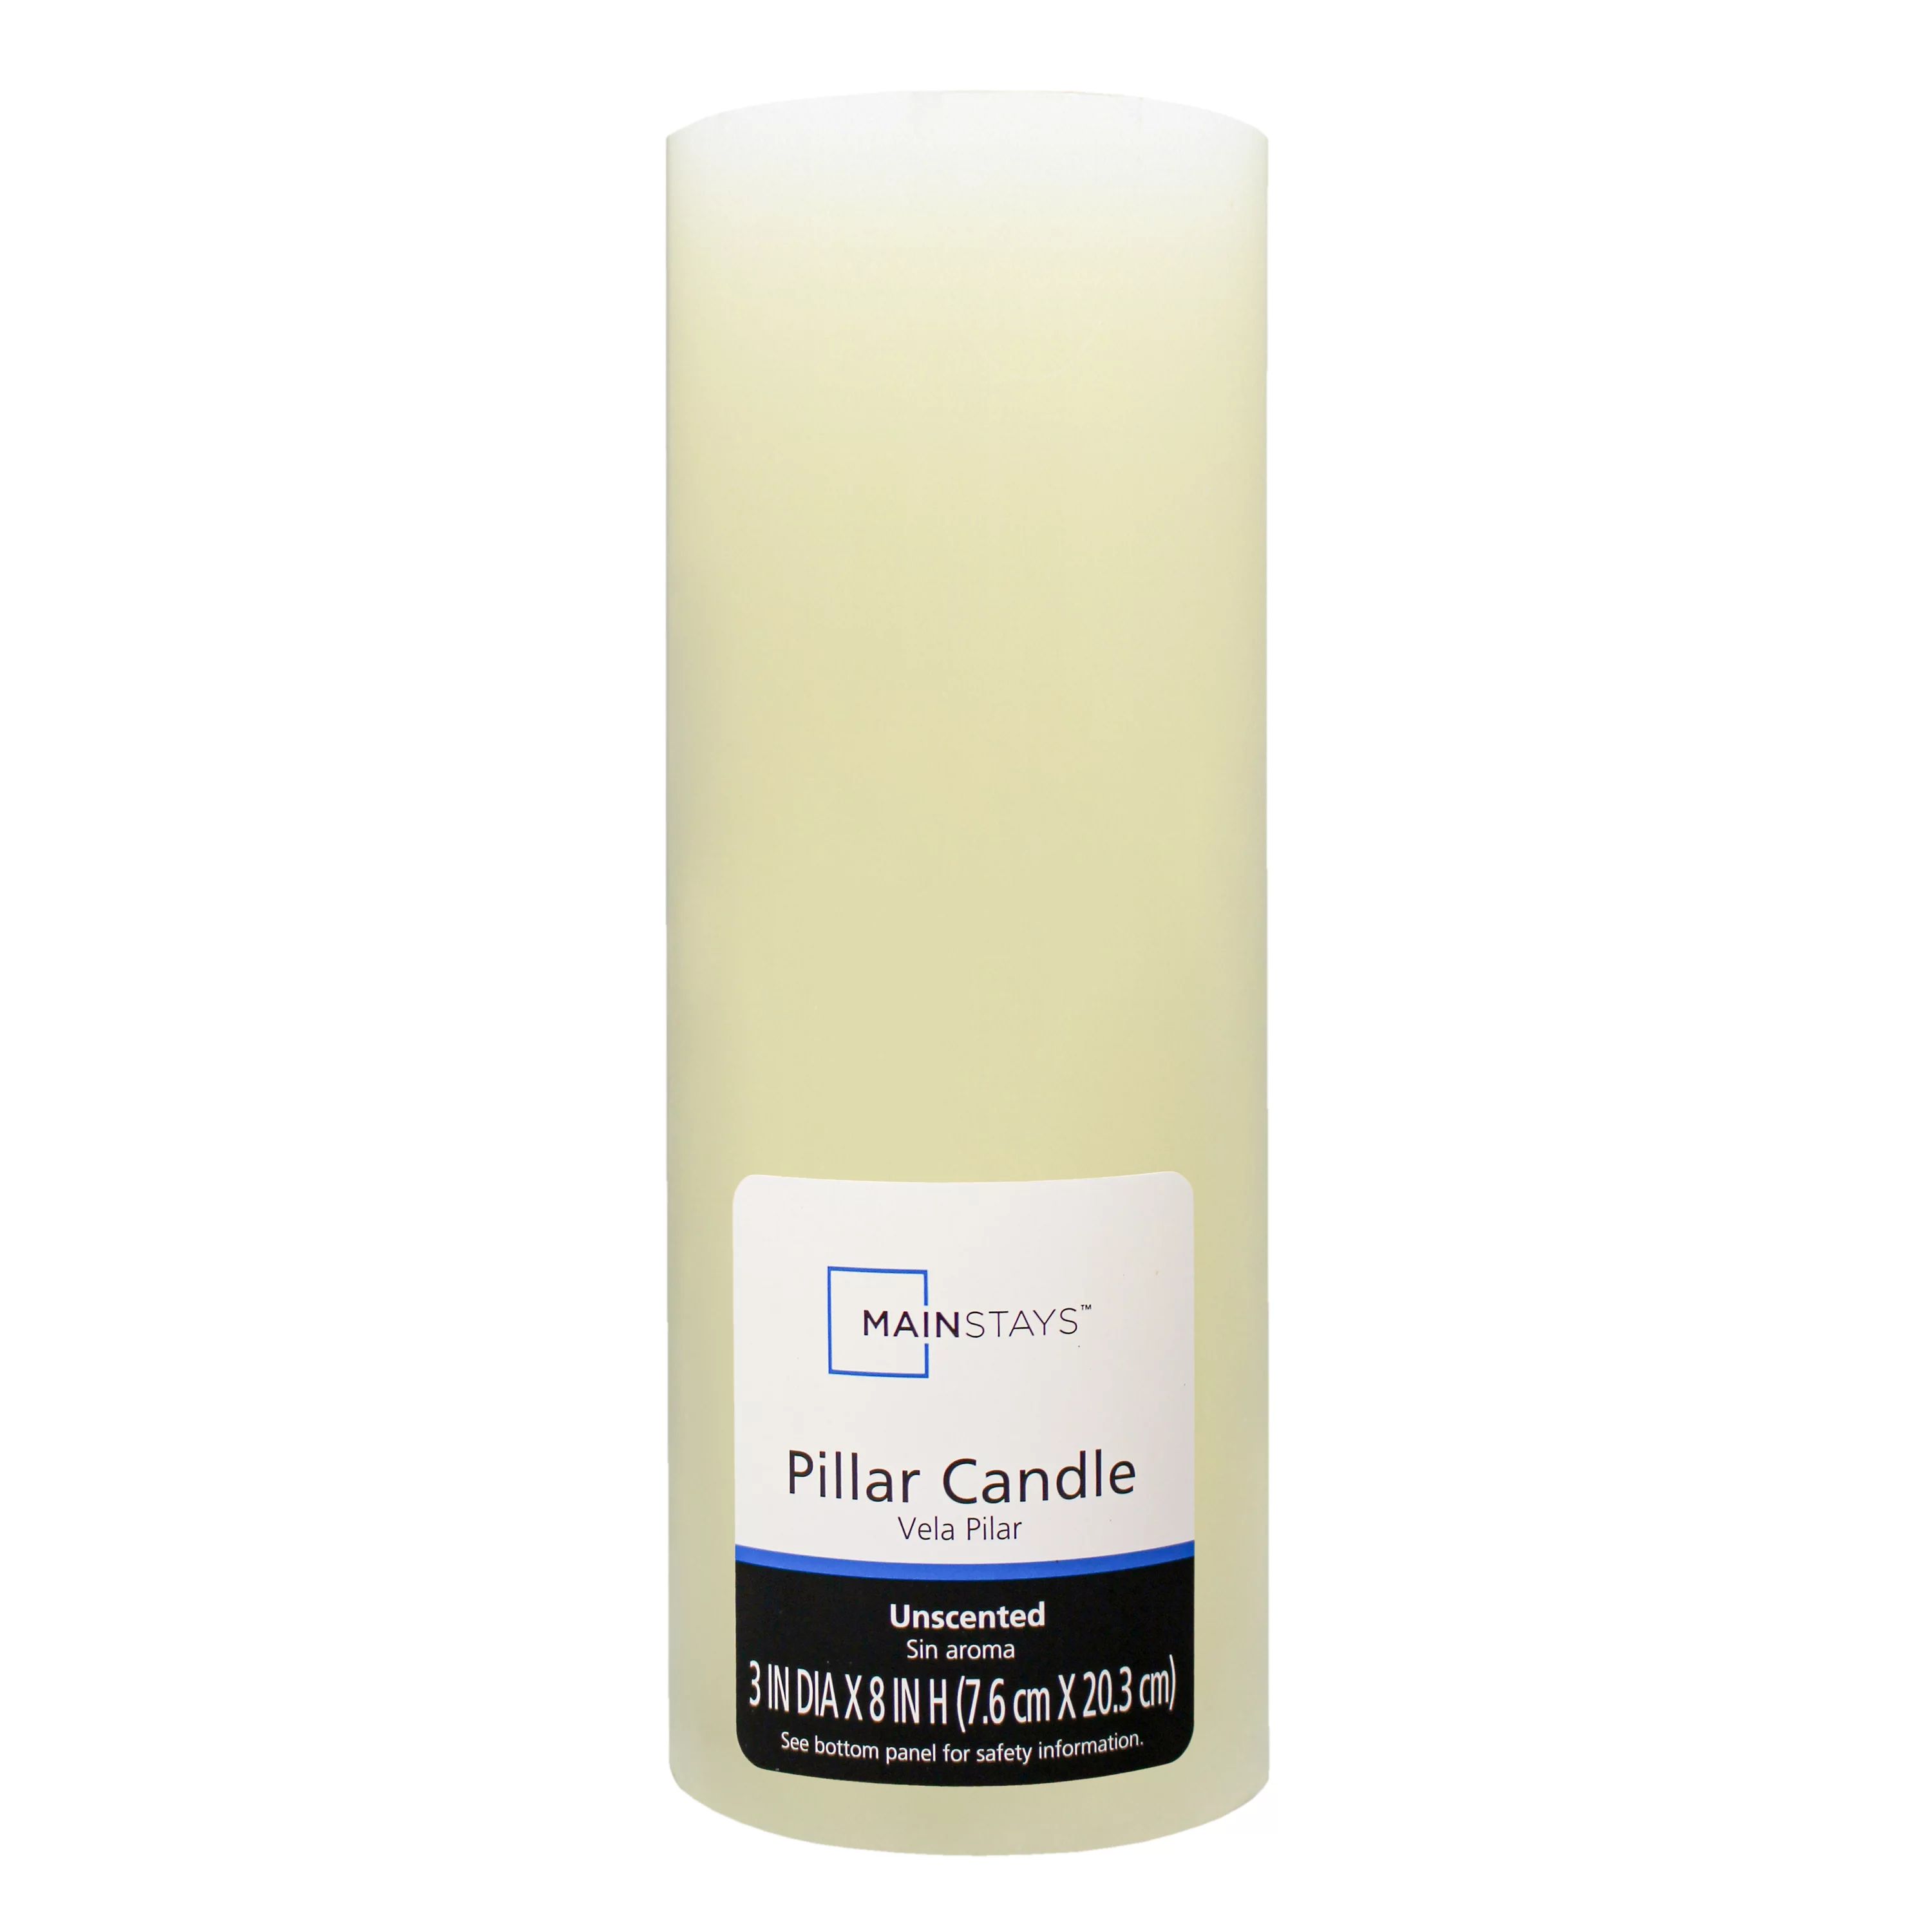 Mainstays Unscented Pillar Candle, 3x8 inches, Ivory | Walmart (US)